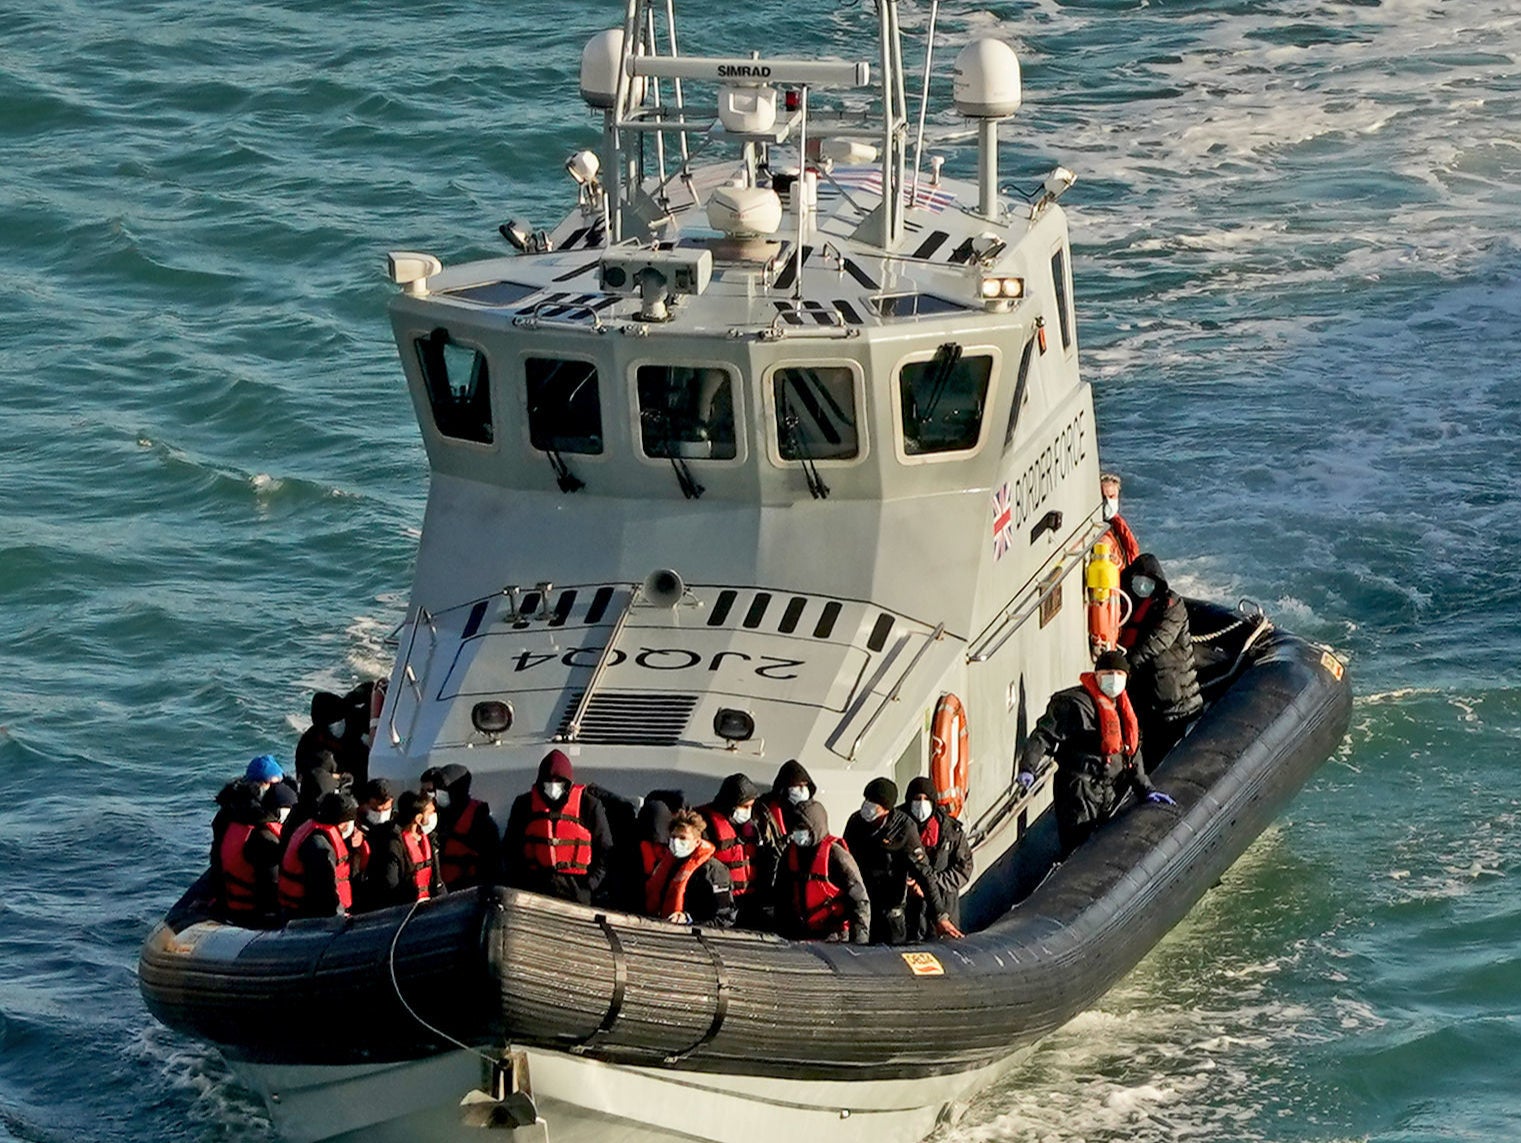 A group of people thought to be migrants are brought to Dover in November